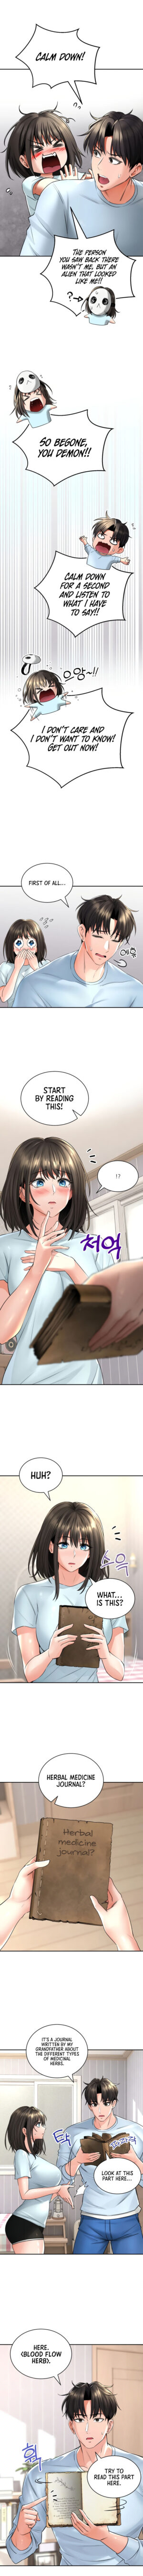 [Lee Juwon] Herbal Love Story (1-15) [English] [Omega Scans] [Ongoing]